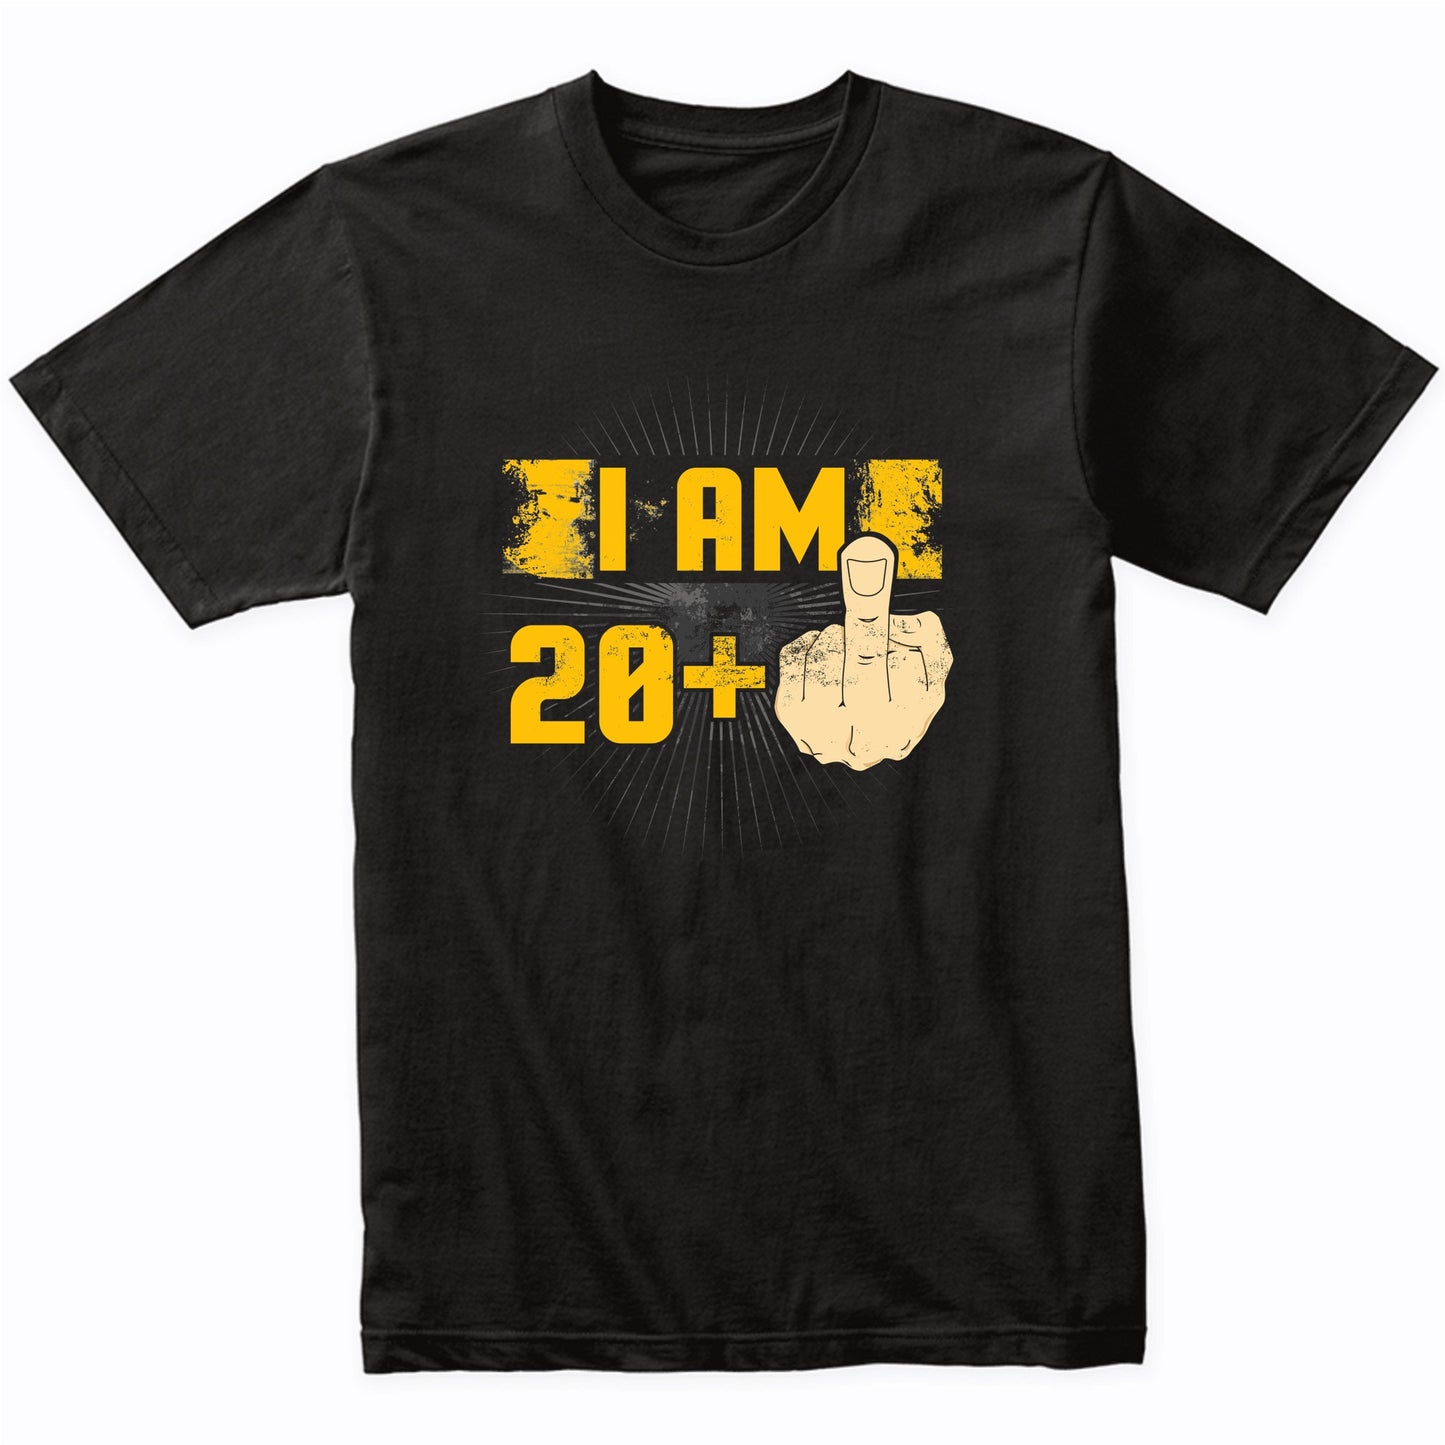 21st Birthday Shirt For Men - I Am 20 Plus Middle Finger 21 Years Old T-Shirt